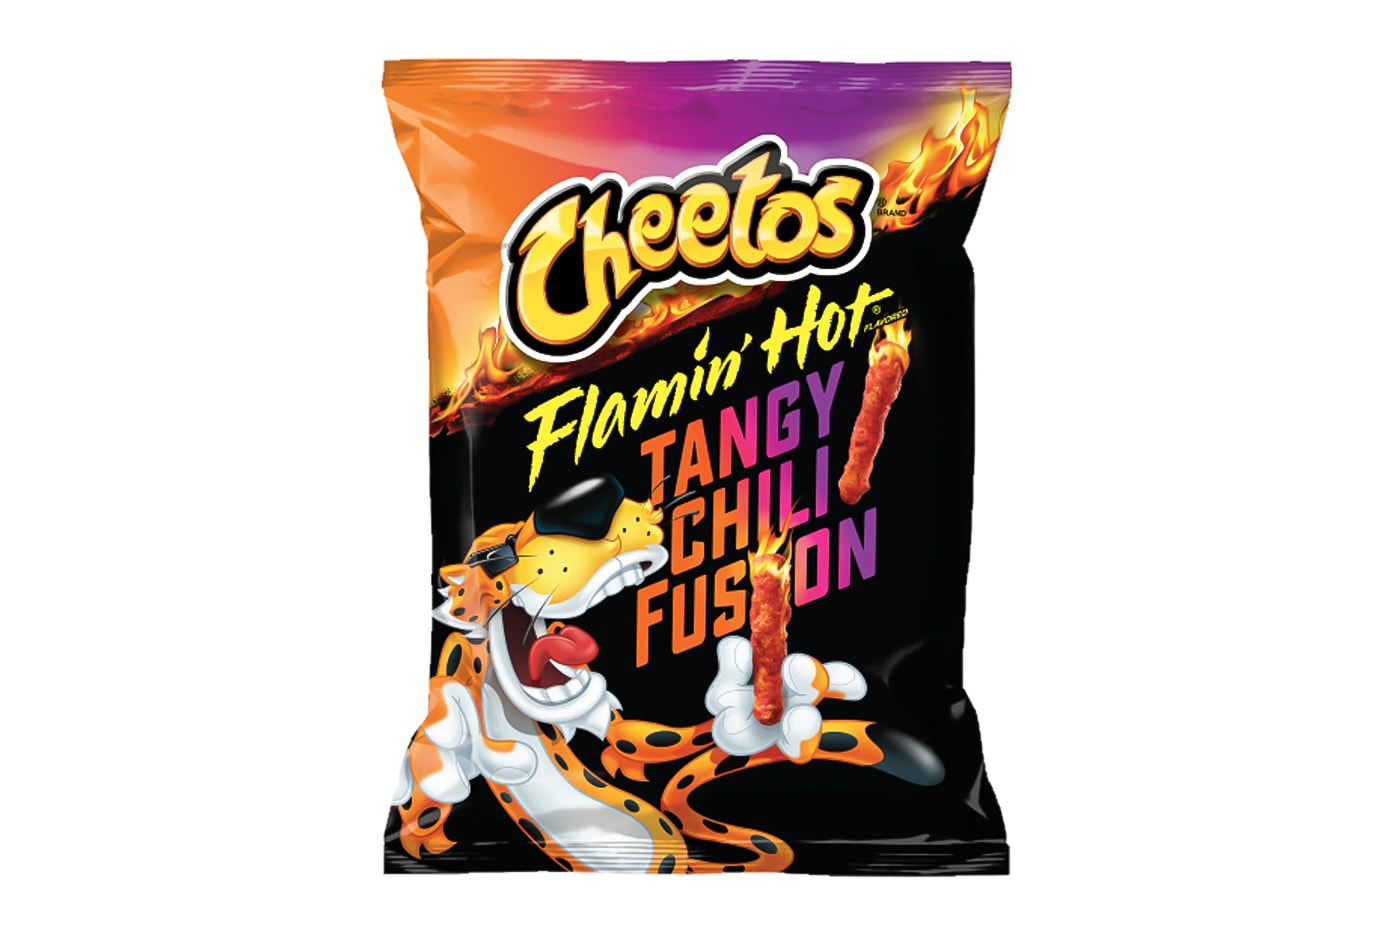 Cheetos Flamin' Hot Tangy Chili Fusion announcement release info